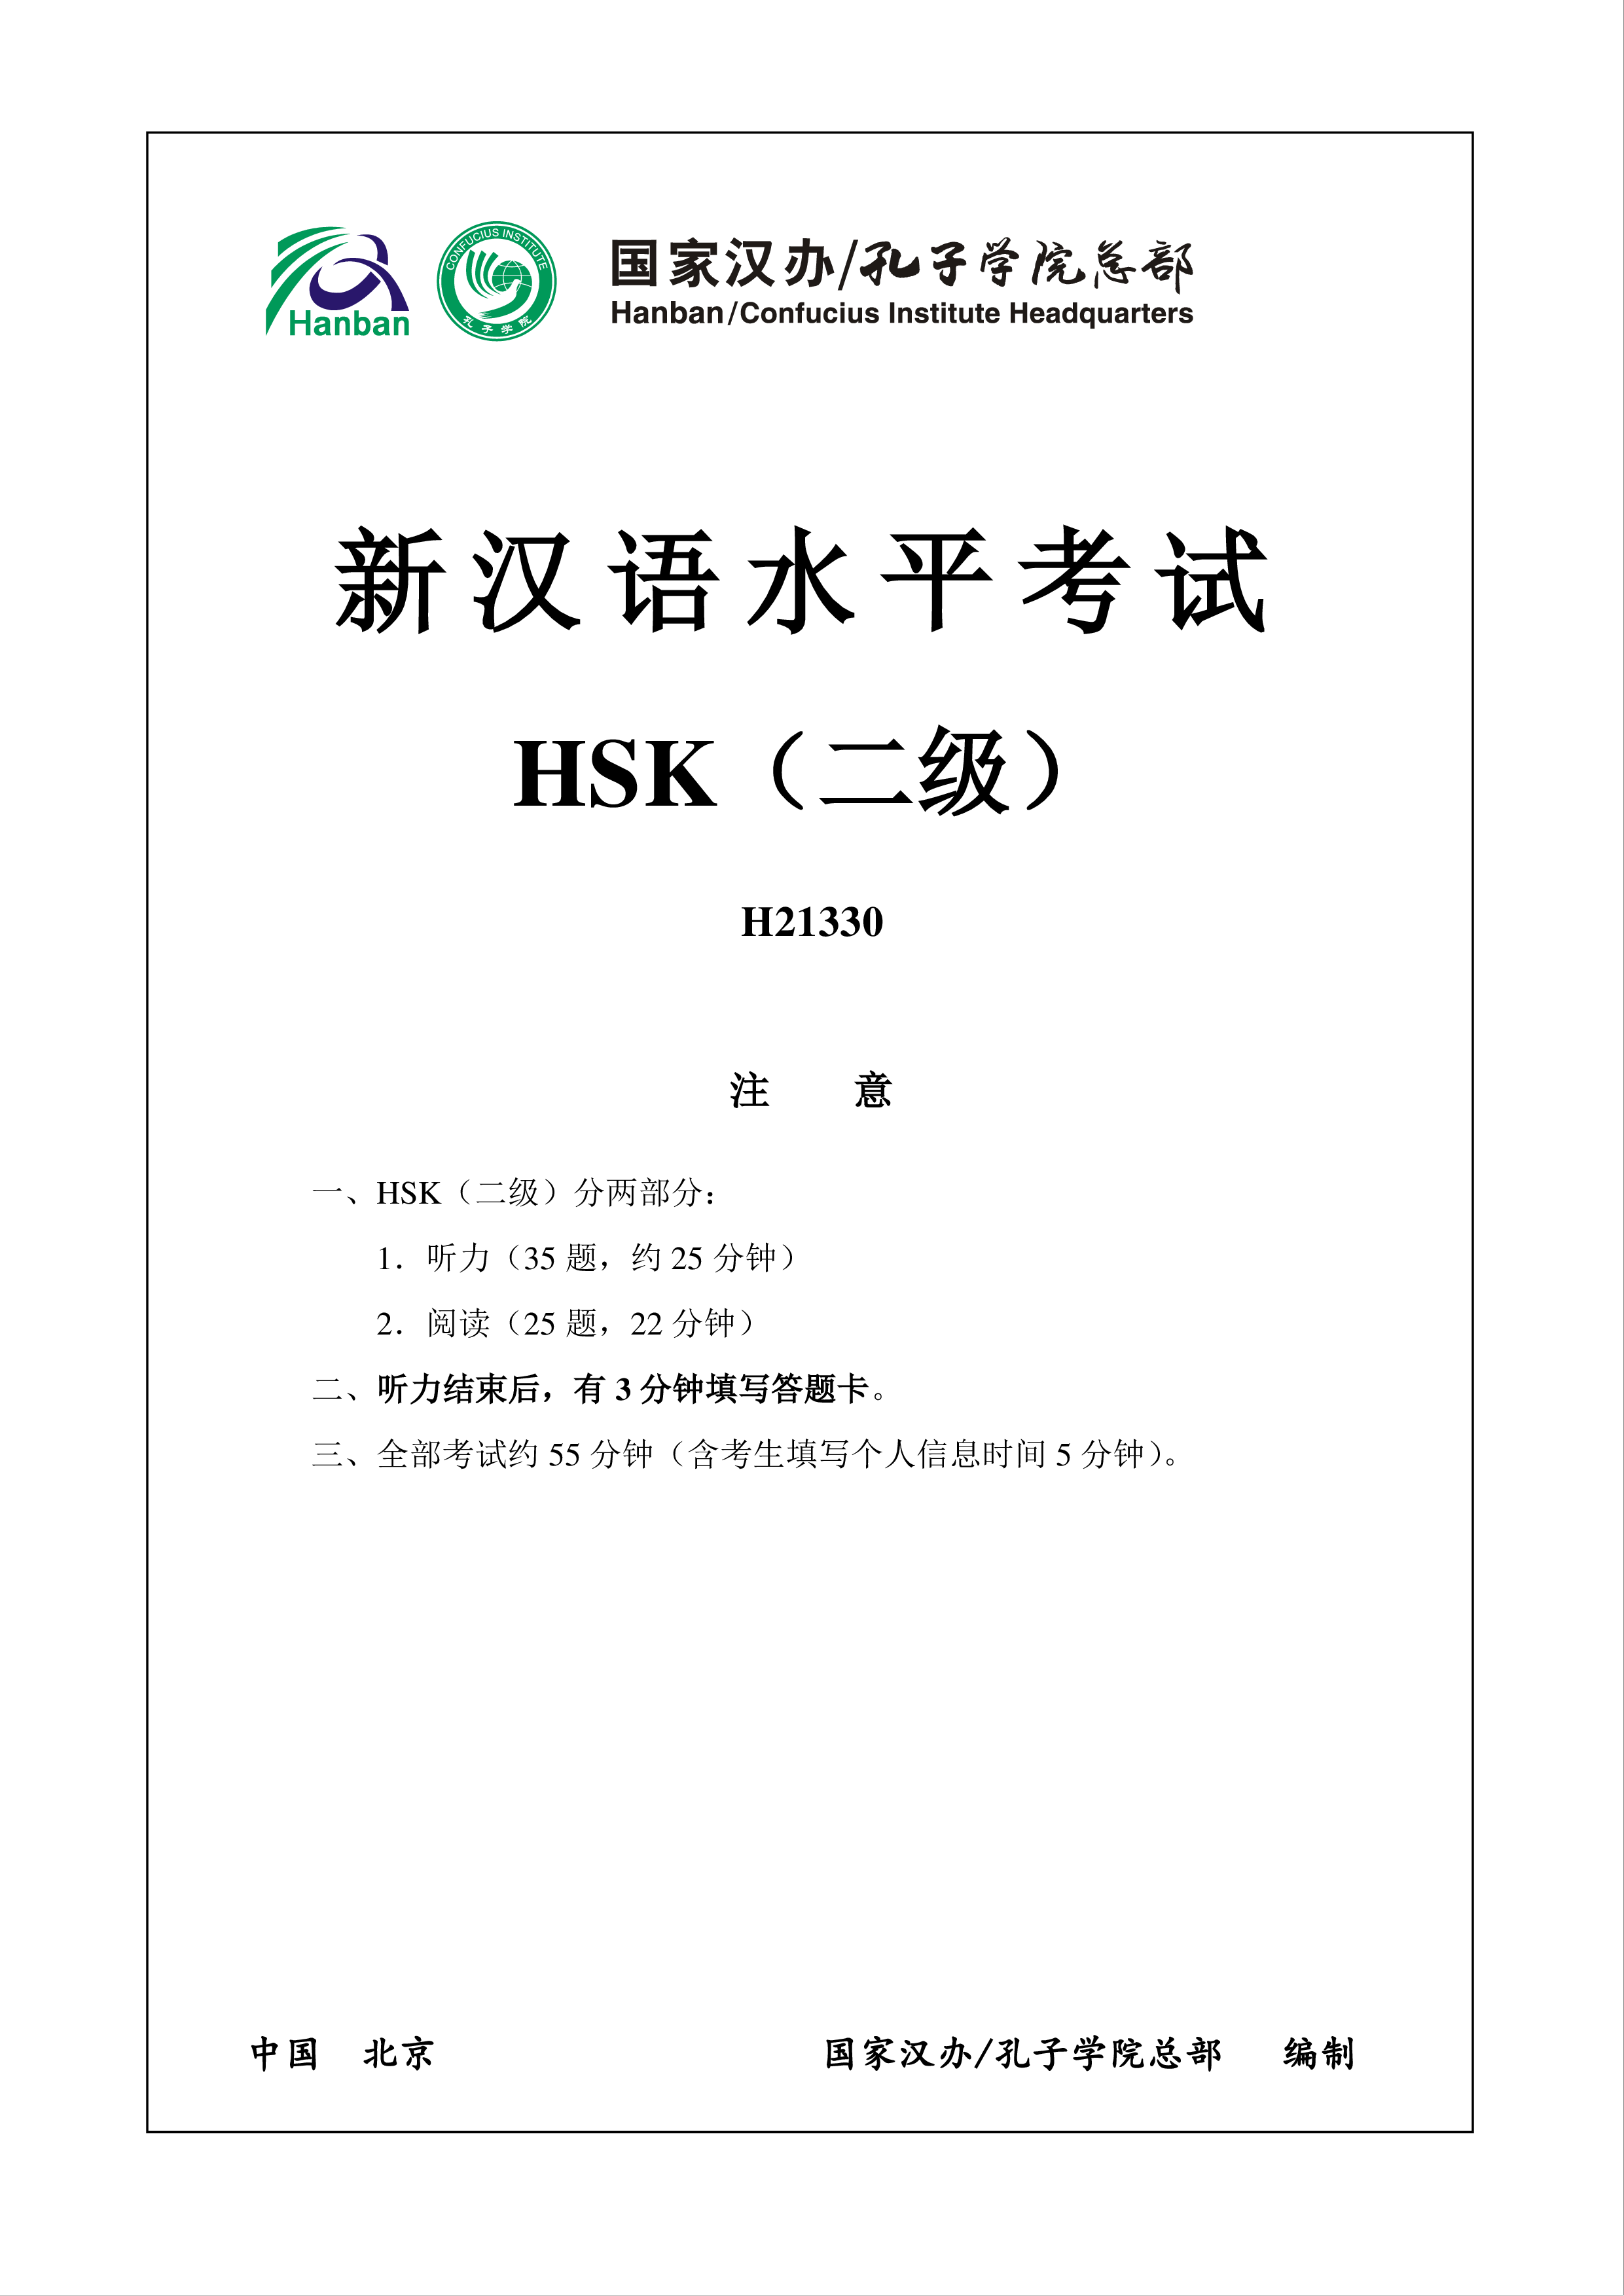 HSK2 H21330 Chinese Exam including Answers, Audio main image